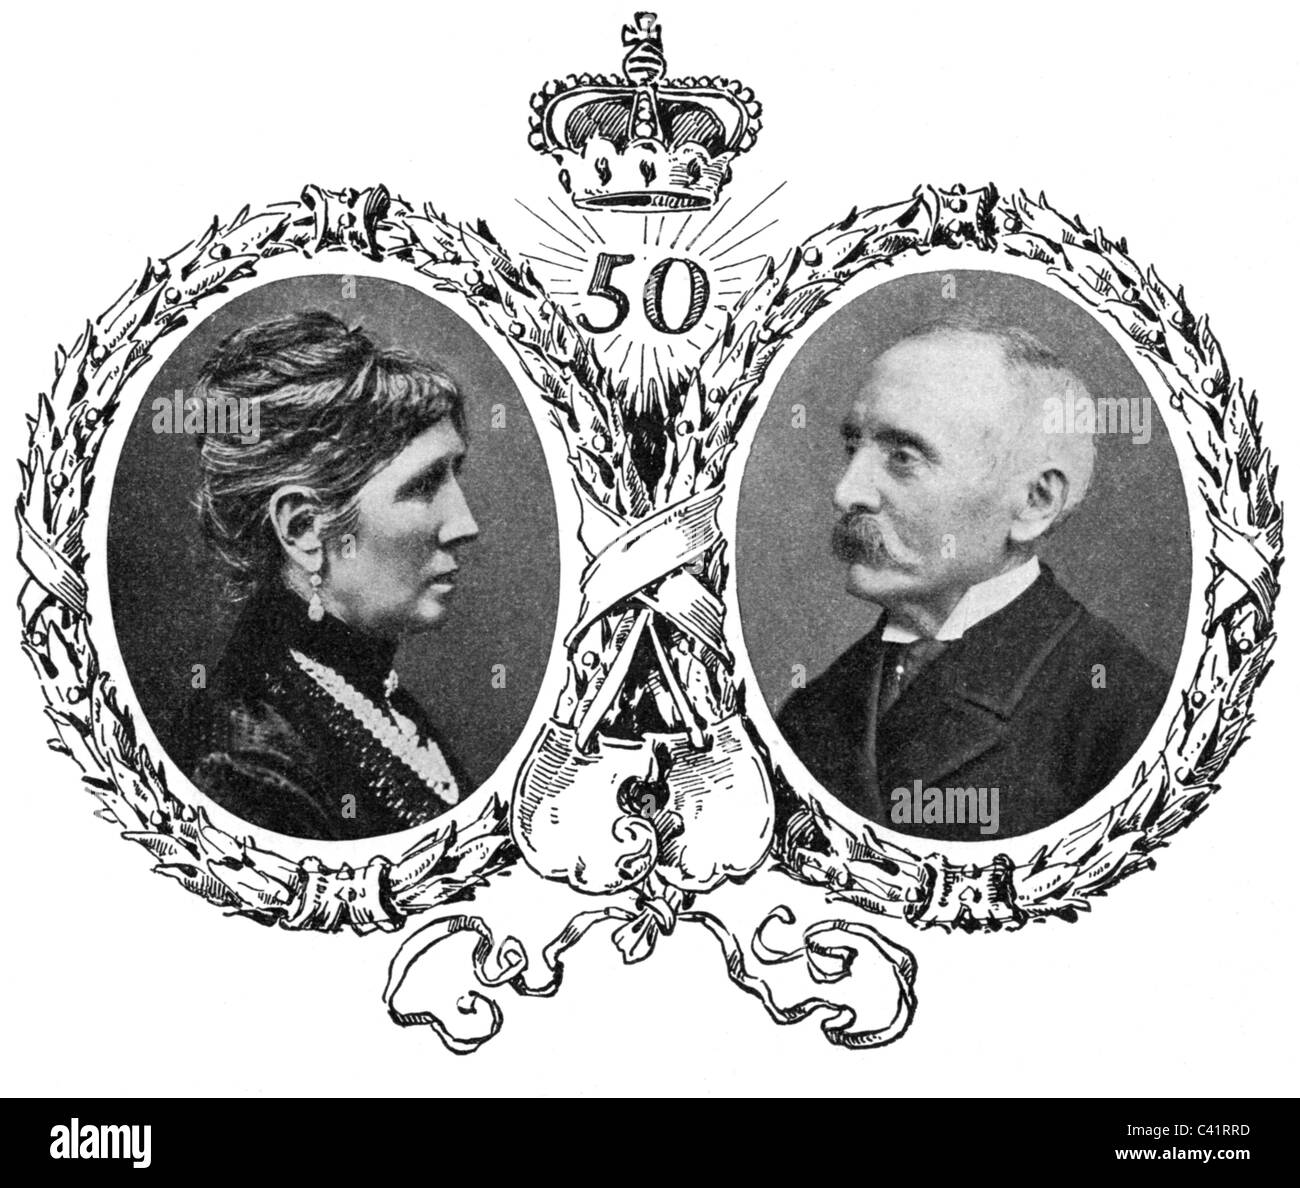 Hohenlohe-Schillingfuerst, Chlodwig Prince of, 31.3.1819 - 6.7.1901, German politician, with wife Marie, 1897, , Stock Photo